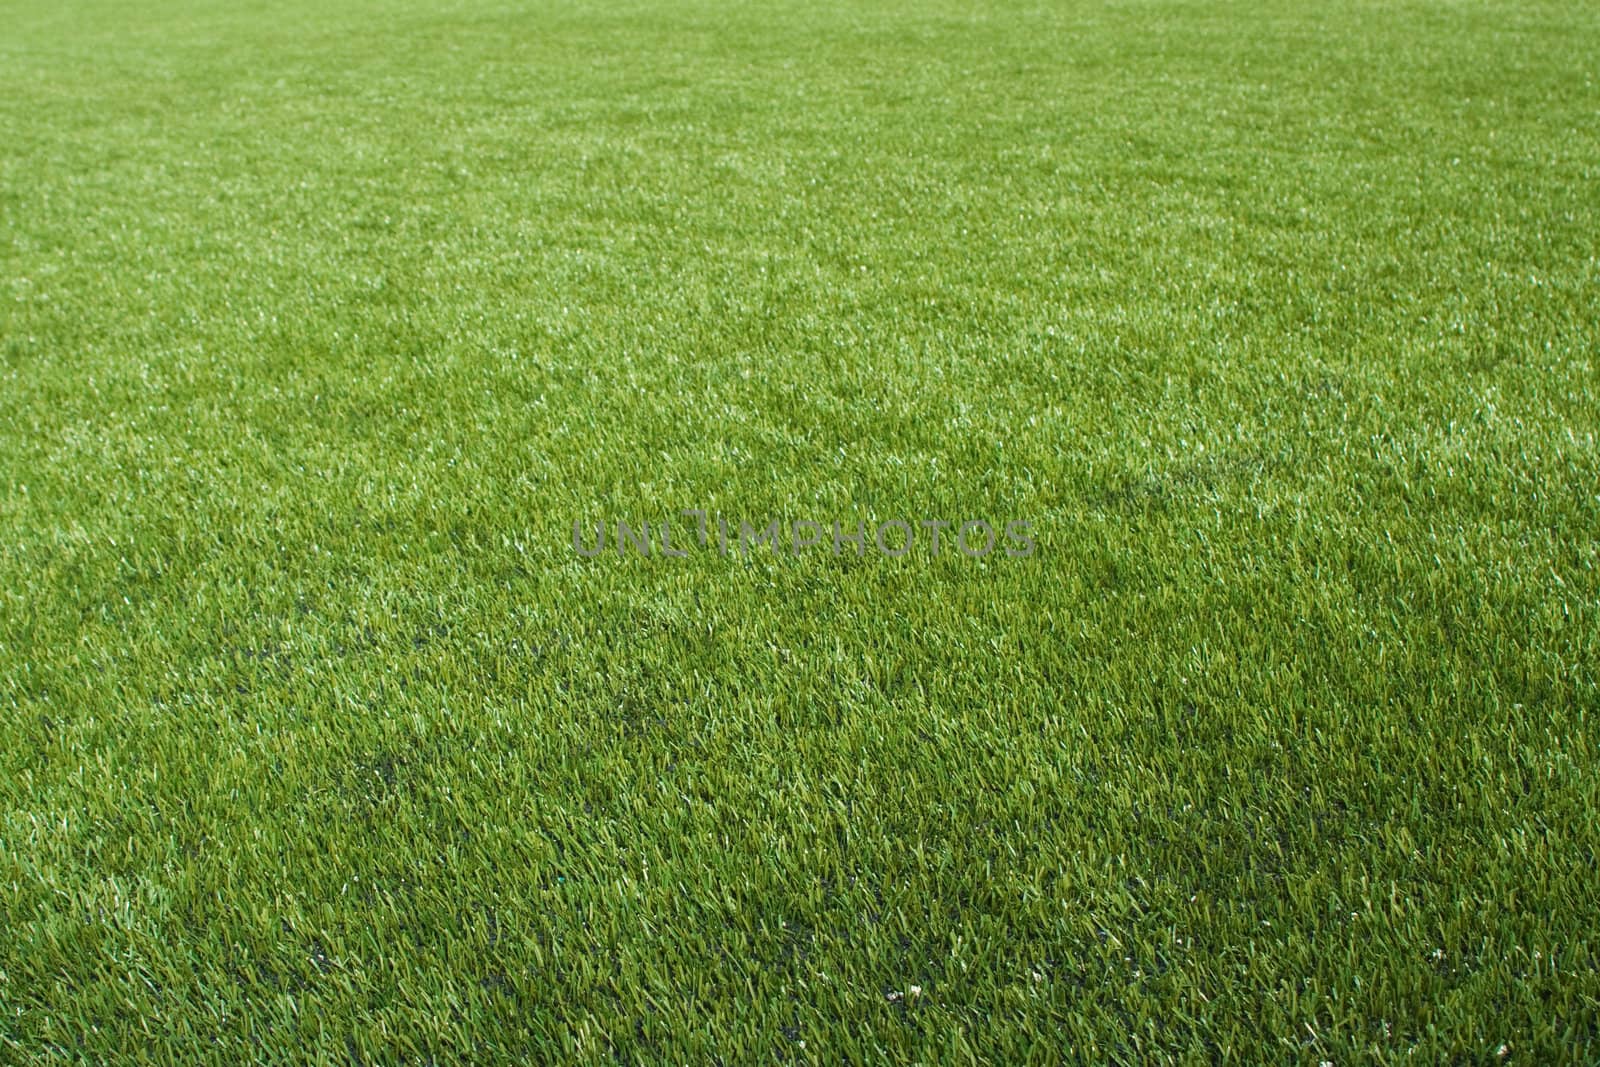 Artificial lawn on the foolball/soccer field, suitable as a background